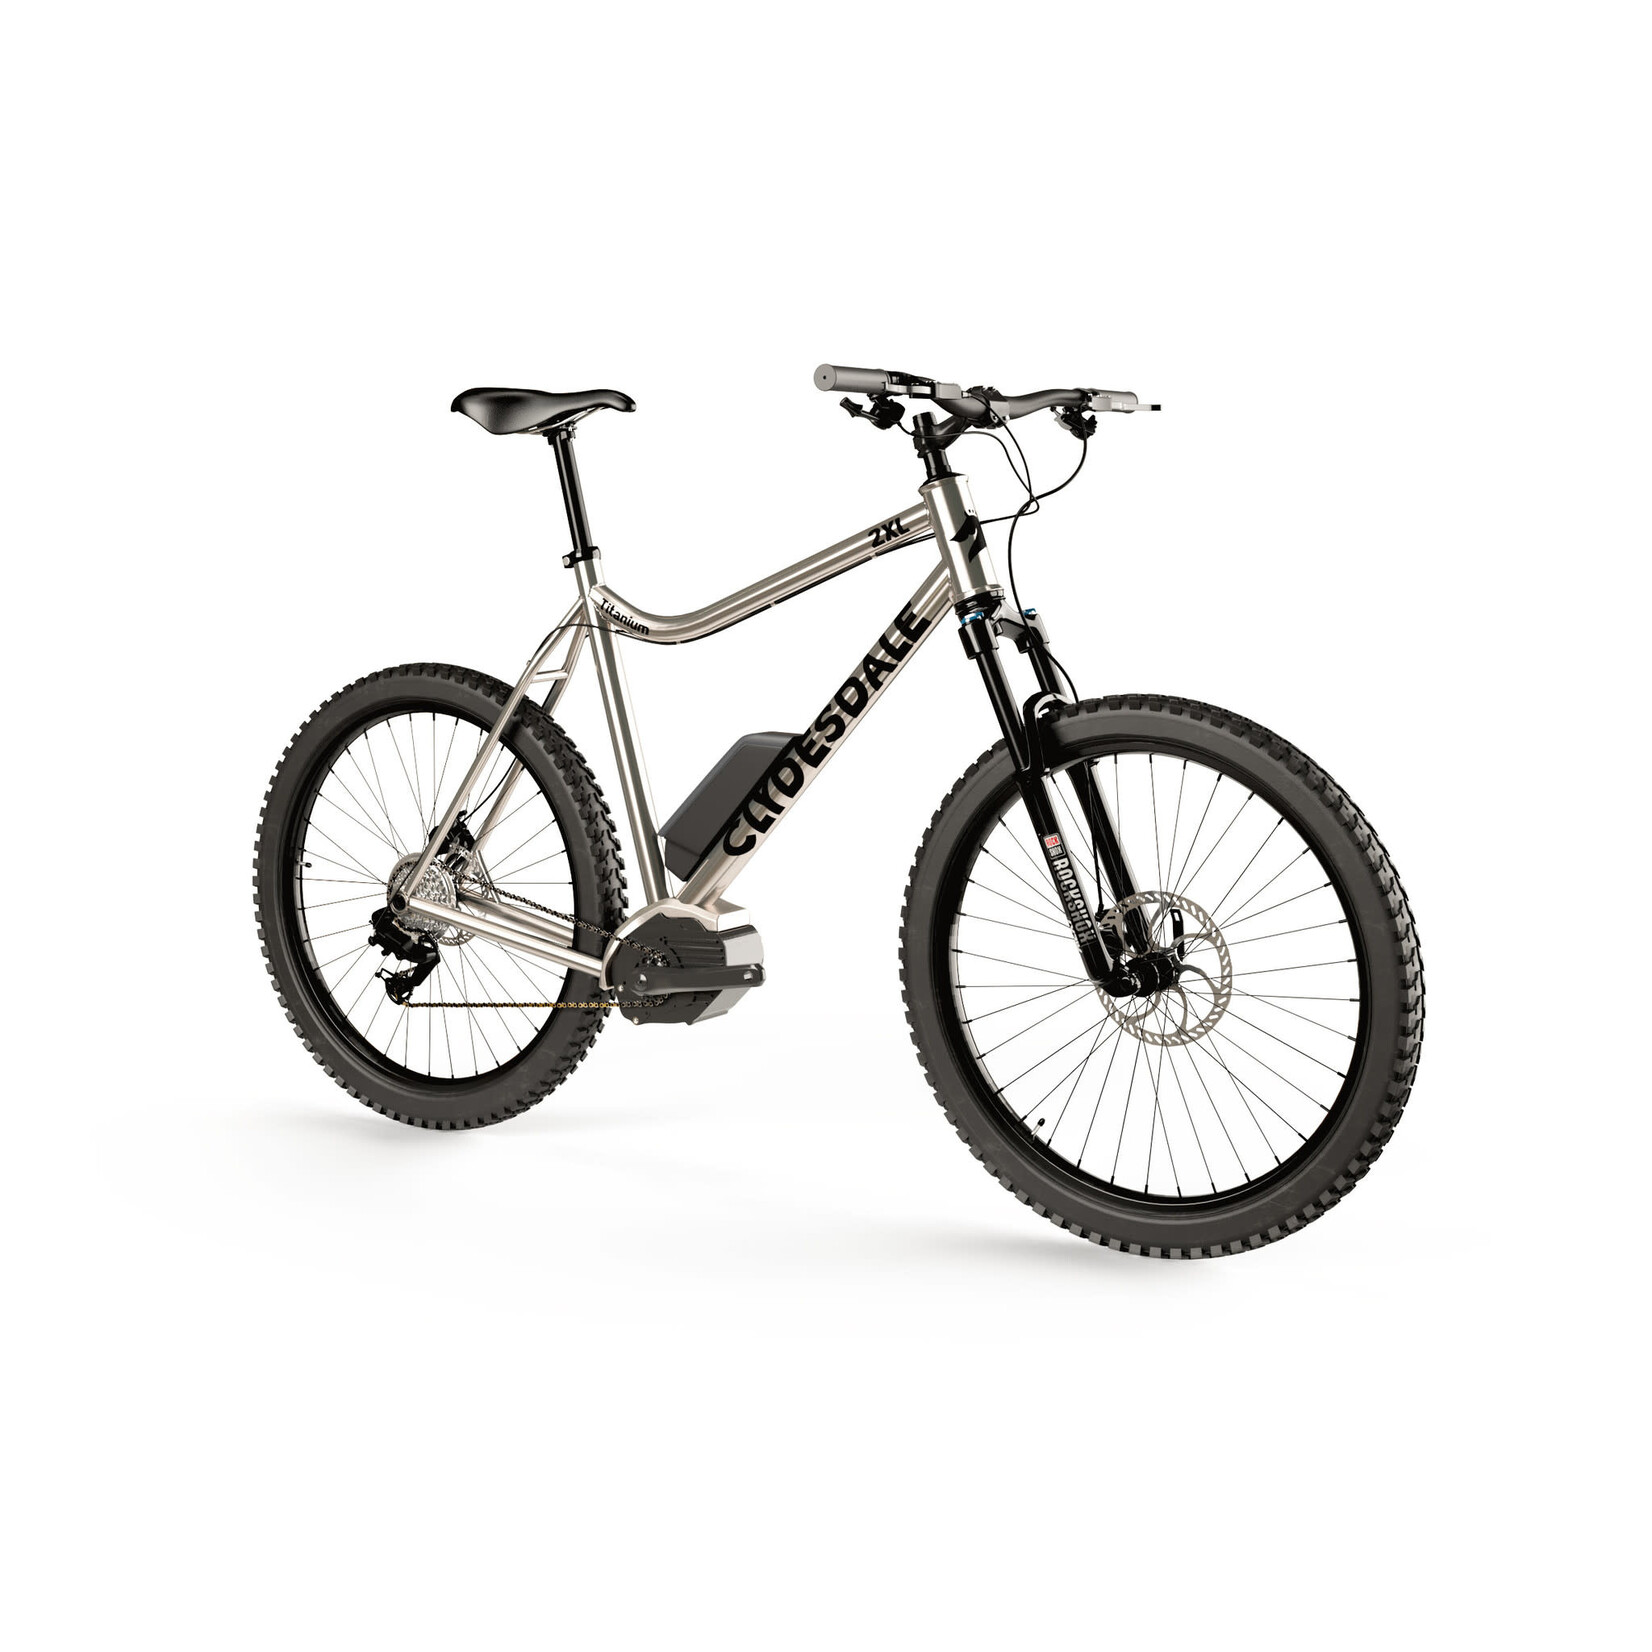 Clydesdale Clydesdale Spur - Titanium Electric Fat Bike/29er